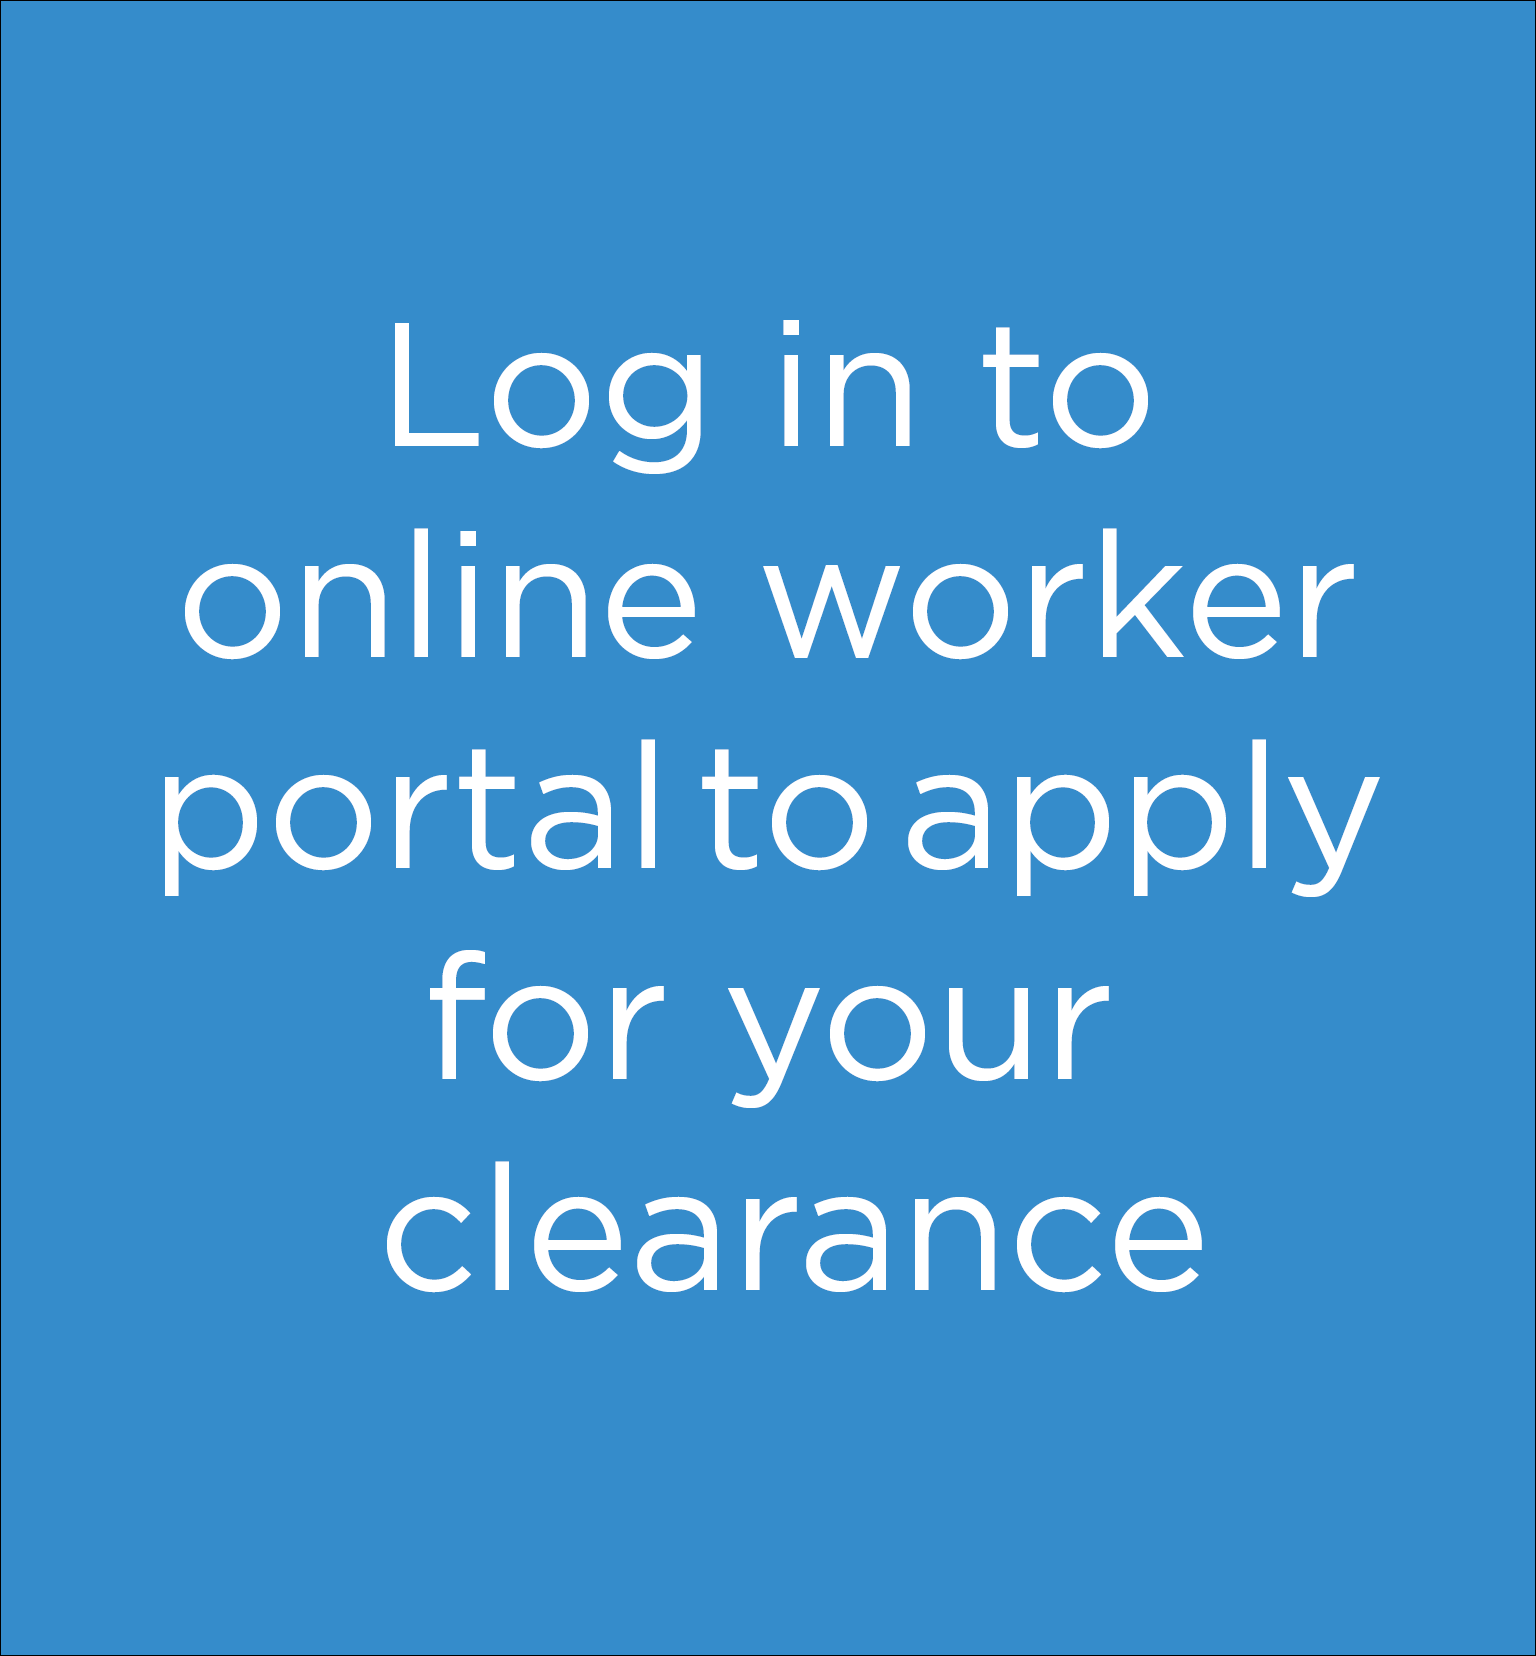 Login to online worker portal to apply for your clearance